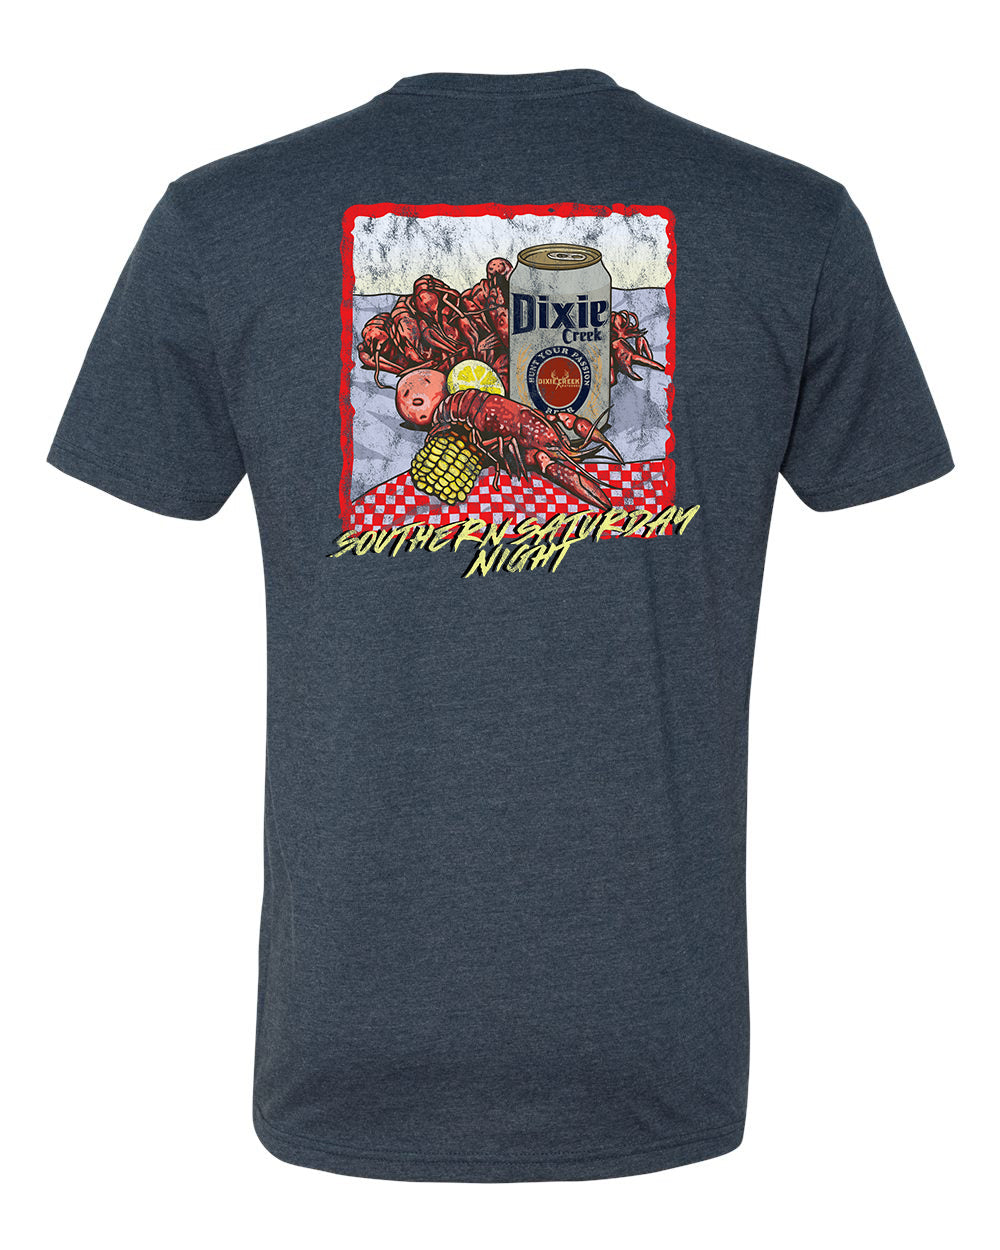 Southern Saturday Nights - Next Level Tee